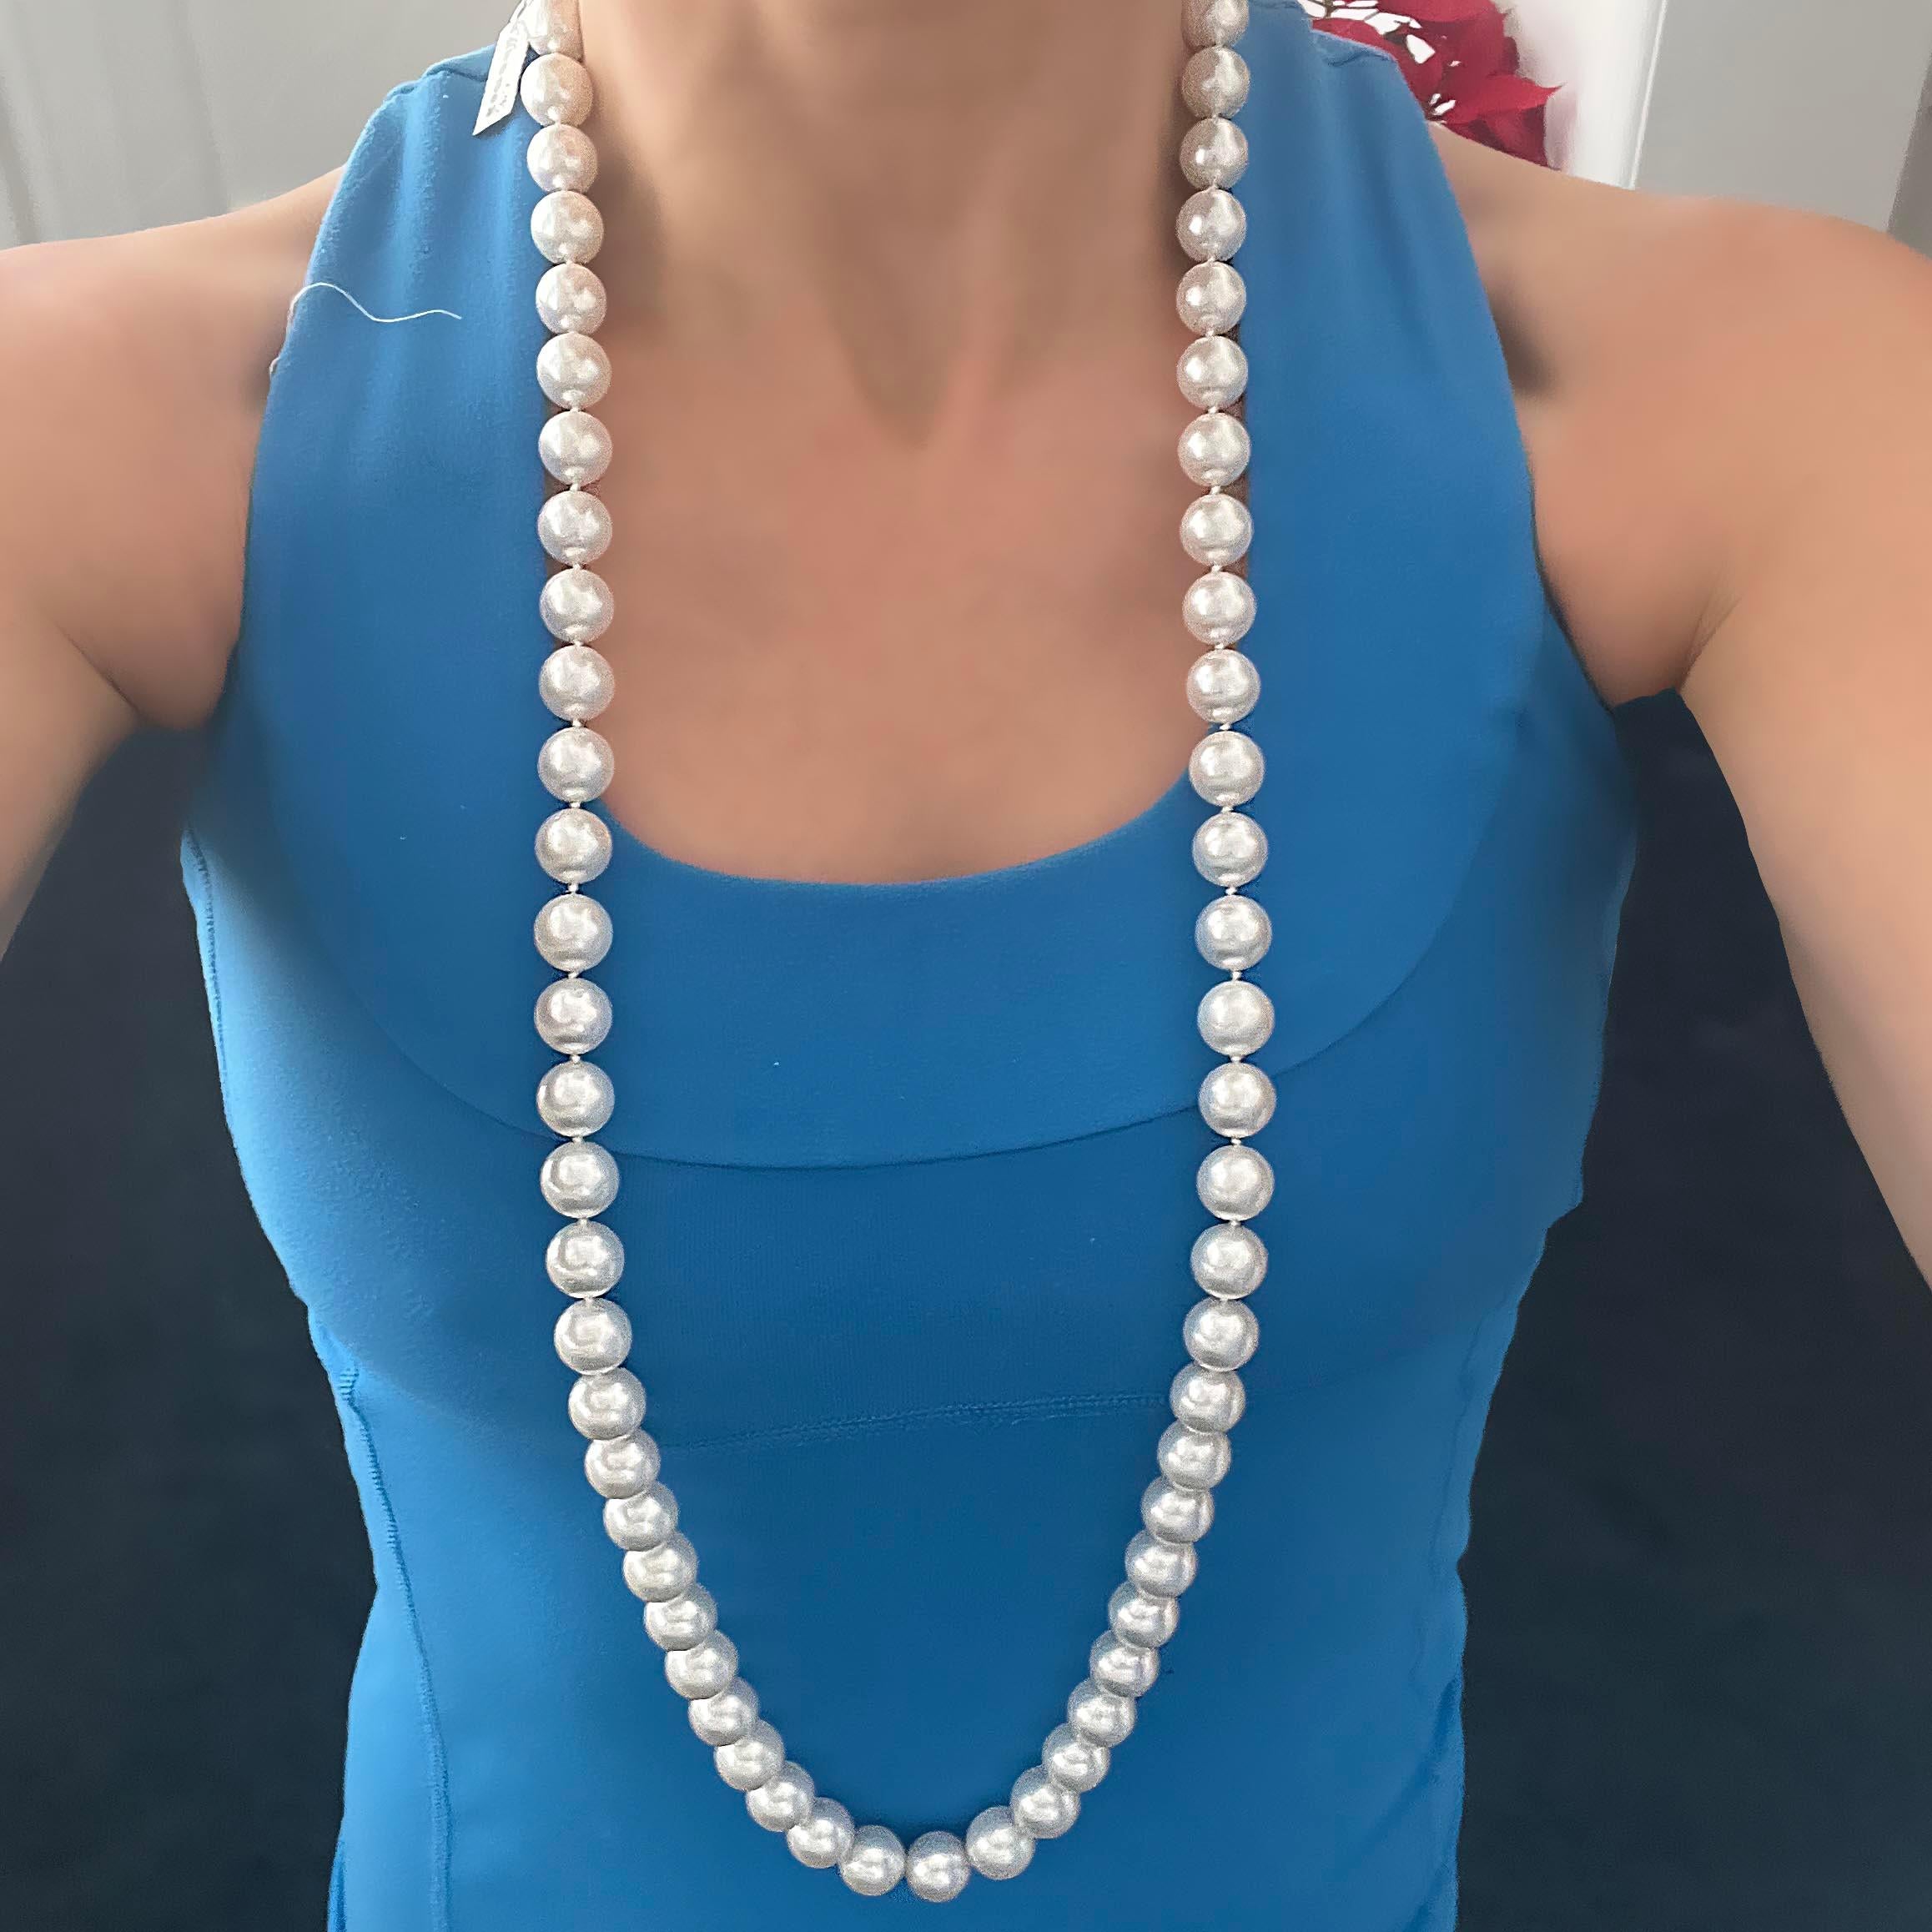 Round Cut Large South Sea Pearl Necklace With Platinum Diamond Clasp